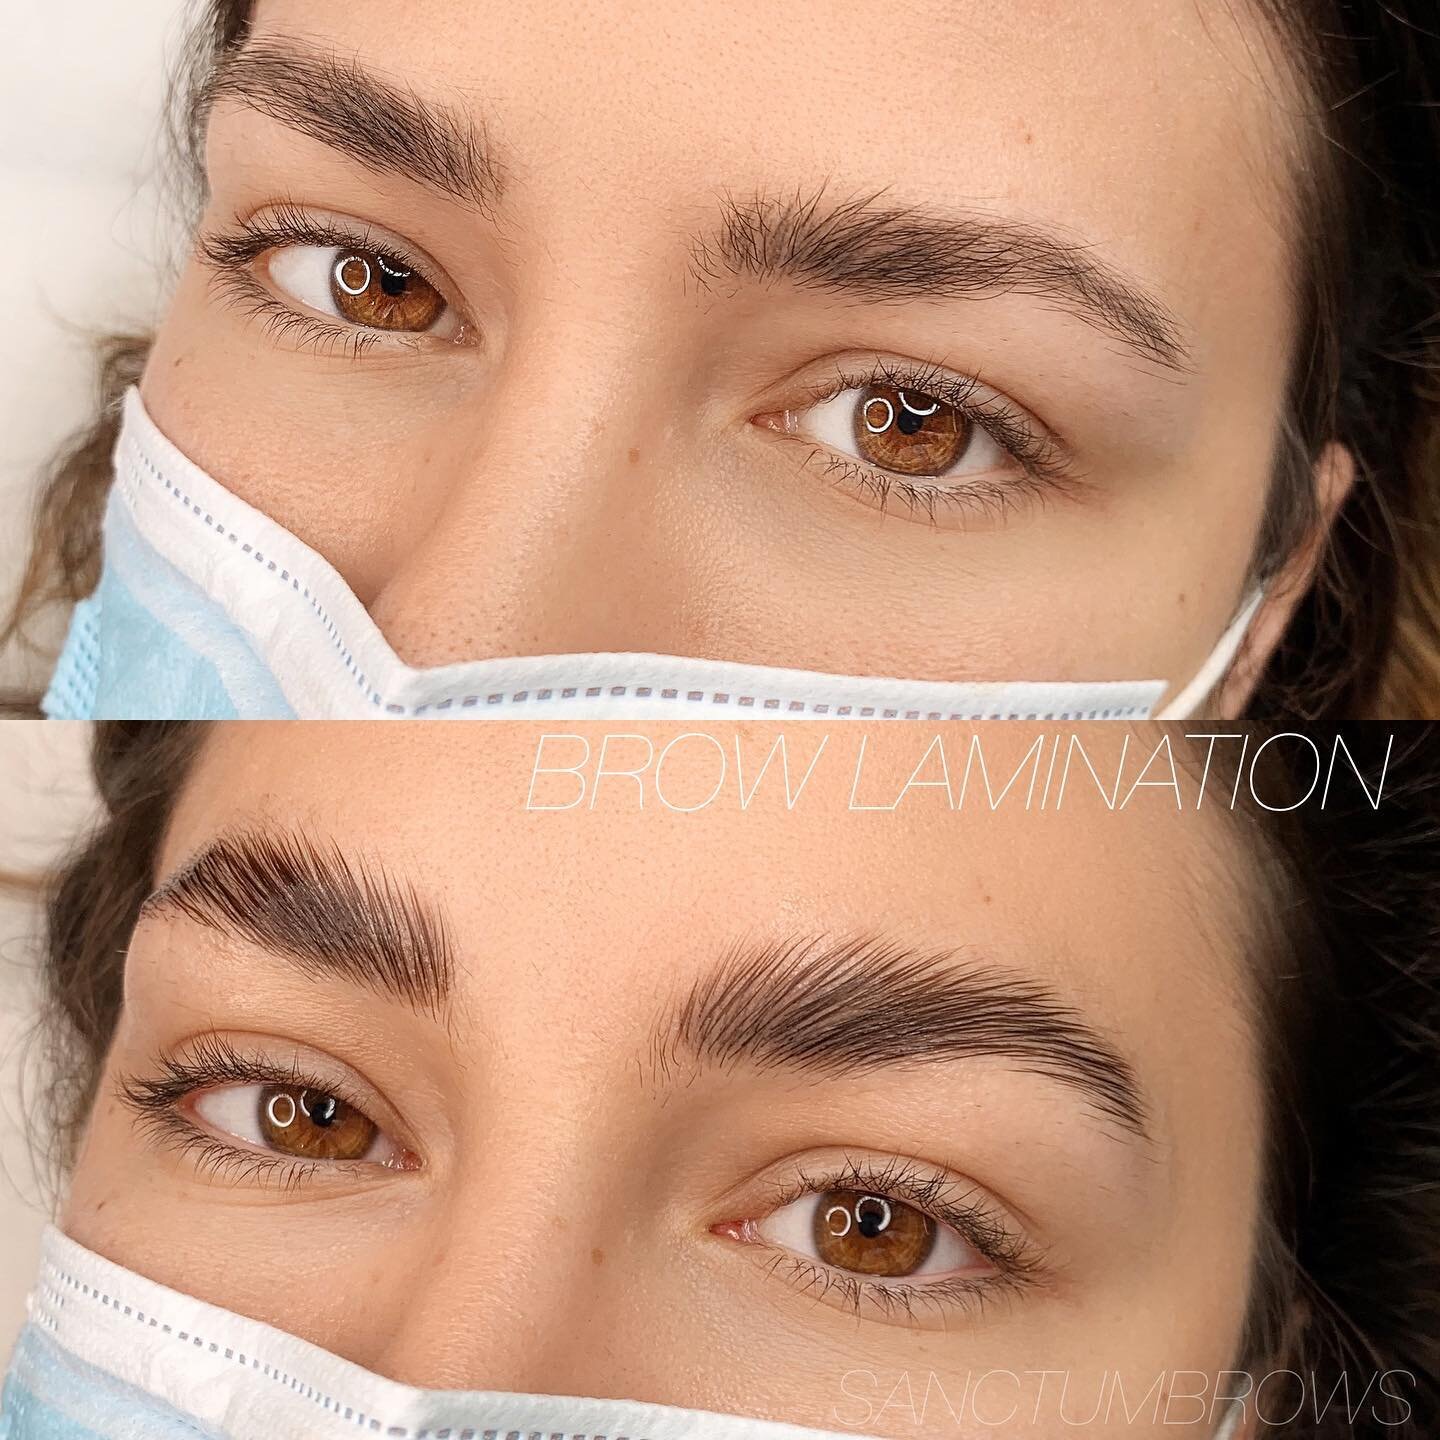 Brow lamination over healed Microblading done by me! 

This service is a semi-permanent, non invasive procedure that redirects the hair growth for a fluffy, brushed up look. These results can last 6-8 weeks and is the perfect compliment to Microbladi